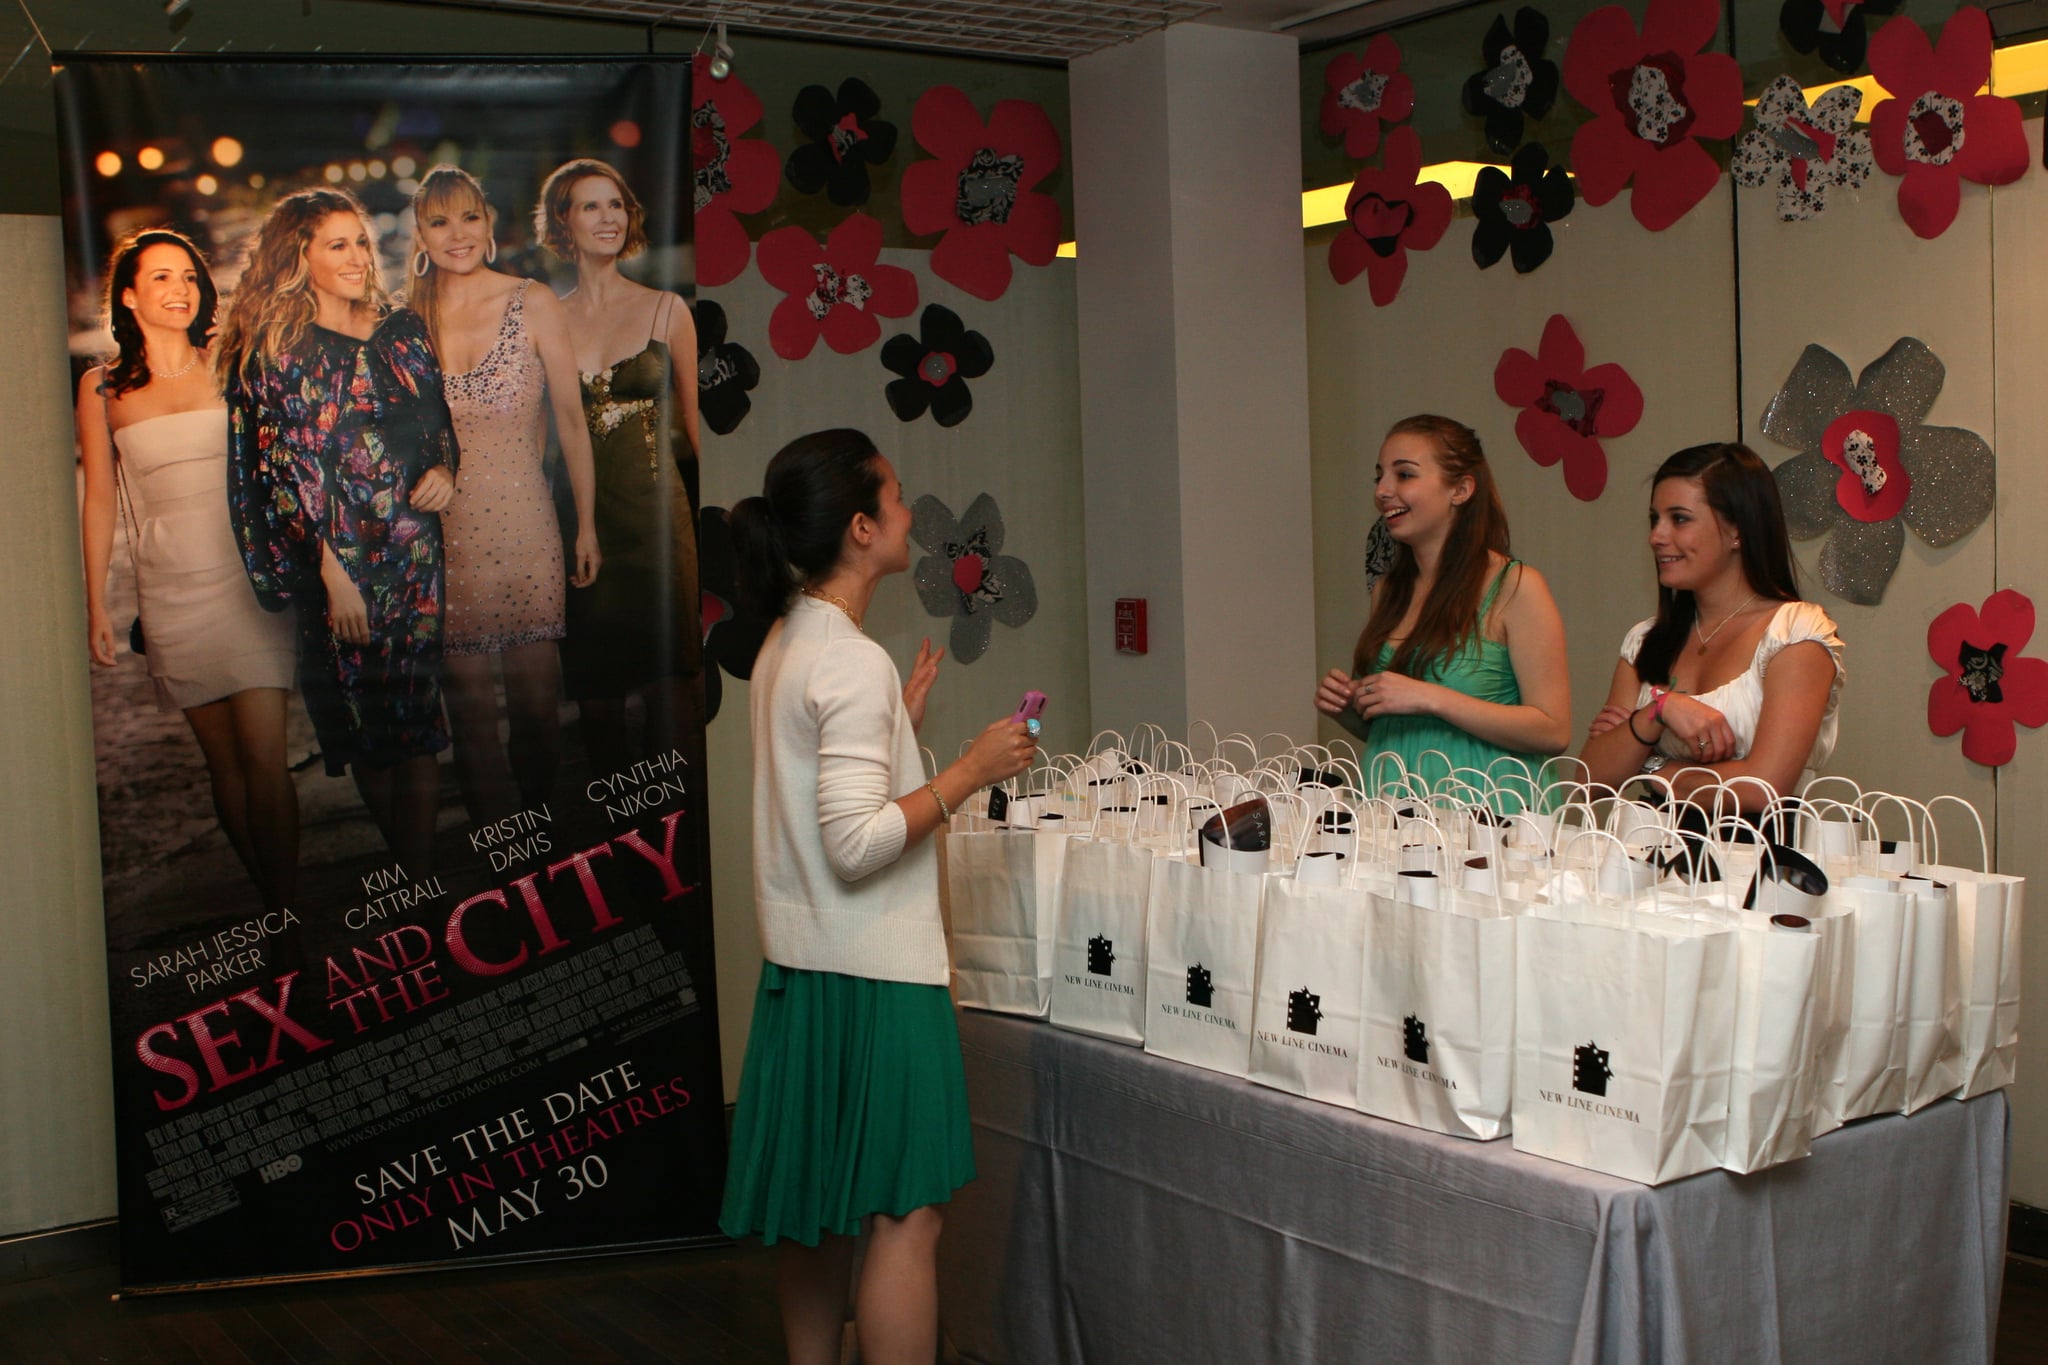 SATC, Sex and the City, Premier